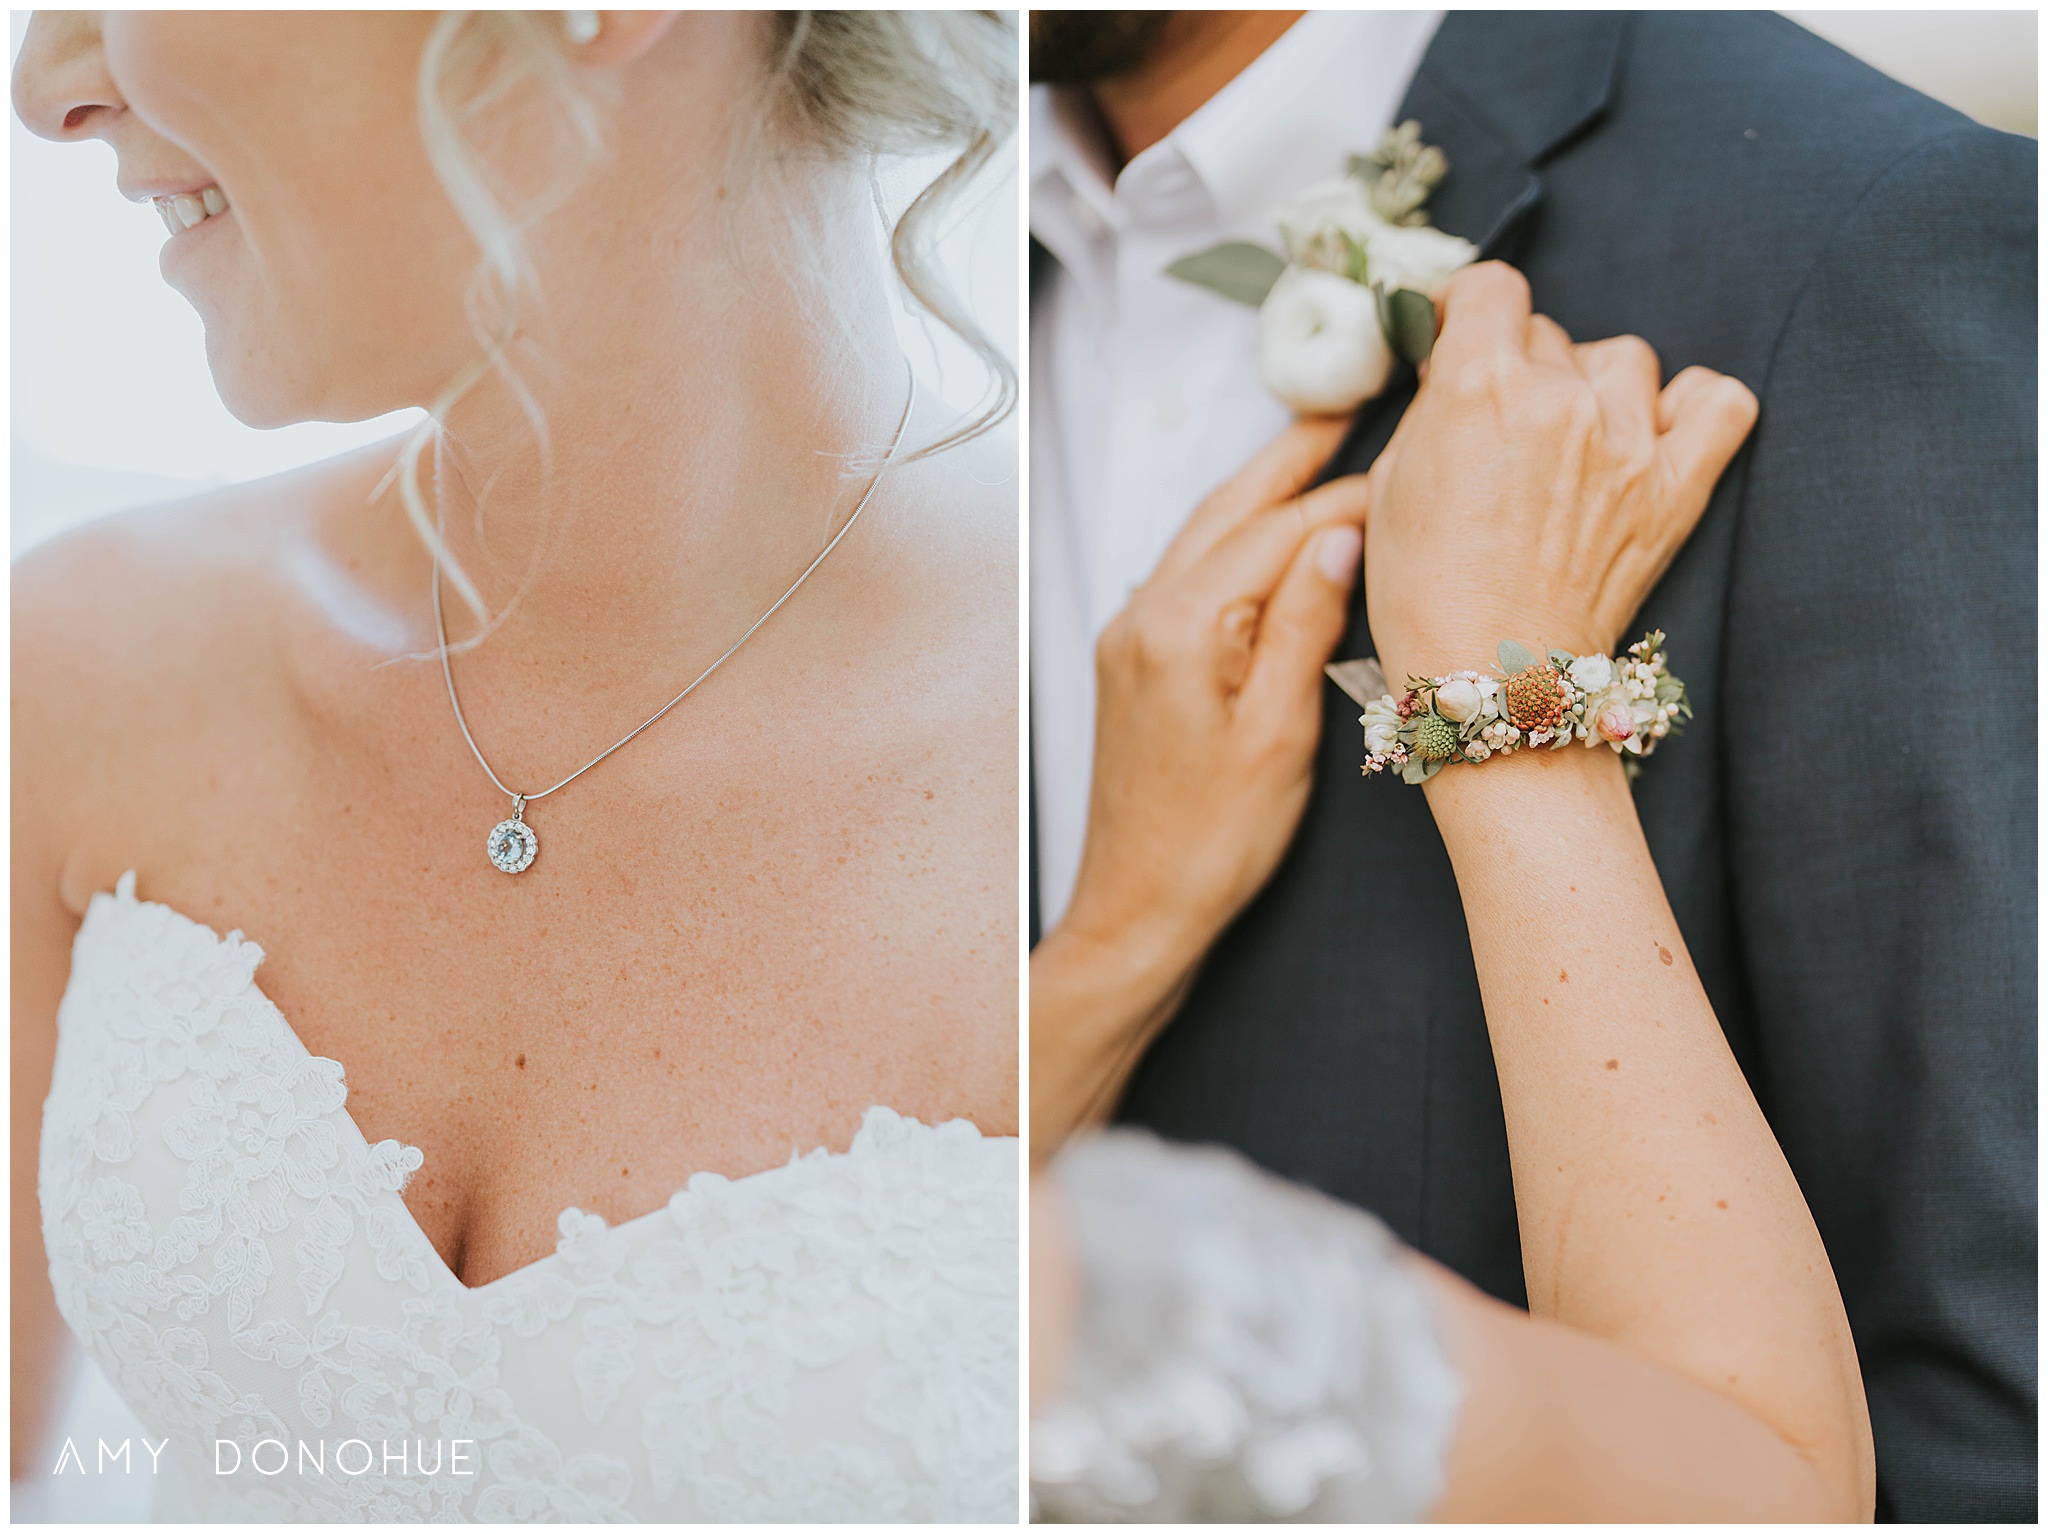 Getting ready | New Hampshire Wedding Photographer | Thae Fells | © Amy Donohue Photography